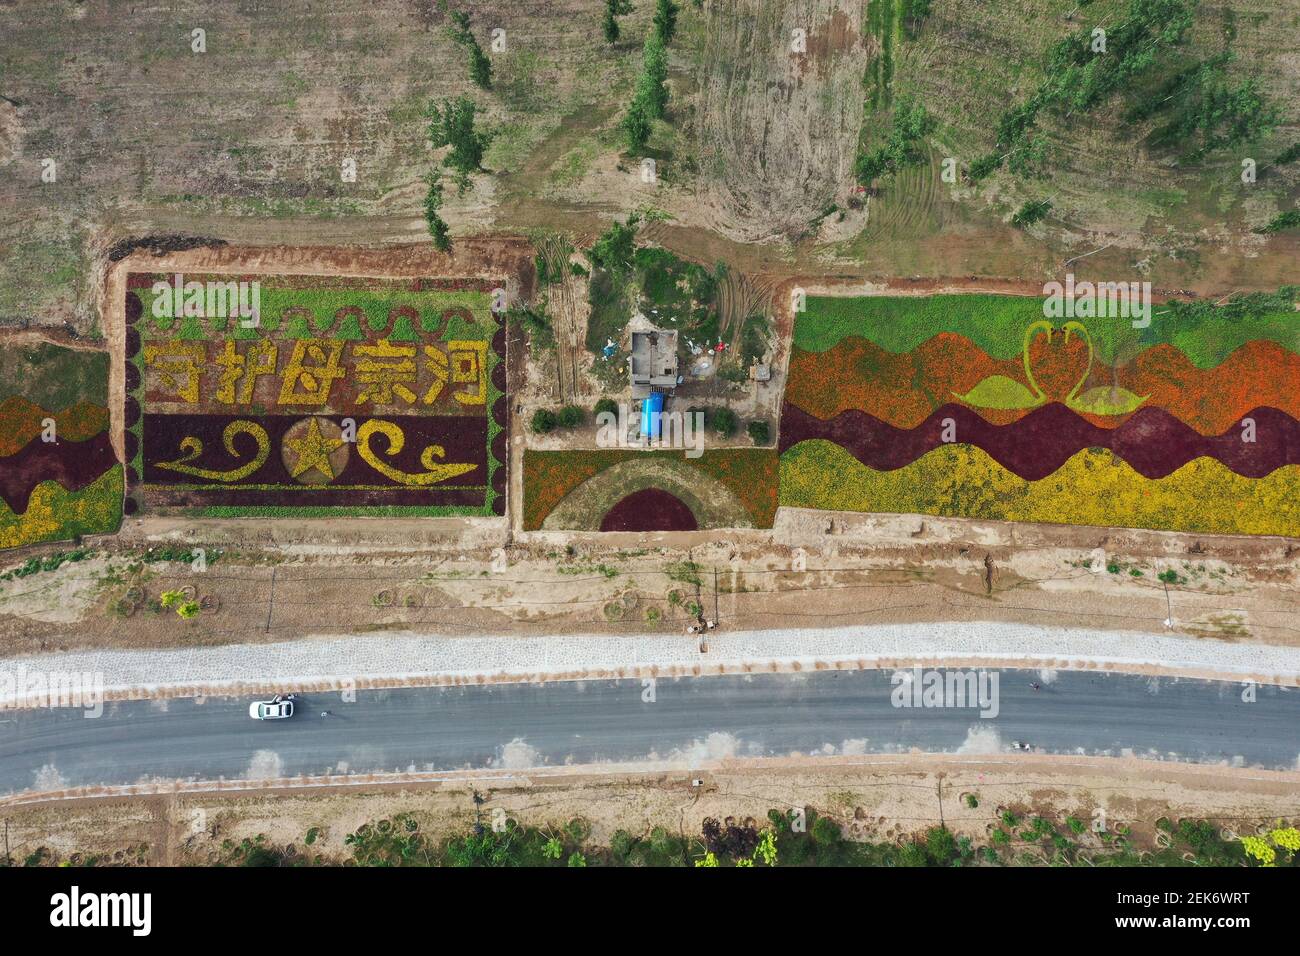 Henanï¼ŒCHINA-In The Sanmenxia section of the Yellow River in Sanmenxia city, Henan Province, on June 21, 2020, colorful flowers spell out the words 'to guard Mother River' to express people's love and protection for the Yellow River and the ecological environment along the Yellow River. In recent years, the local government has comprehensively strengthened the protection of the ecological environment along the Yellow River, ensured the long-term stability of the Yellow River and ensured the high-quality development of the Yellow River economic belt, and built the Ecological project of the Yel Stock Photo